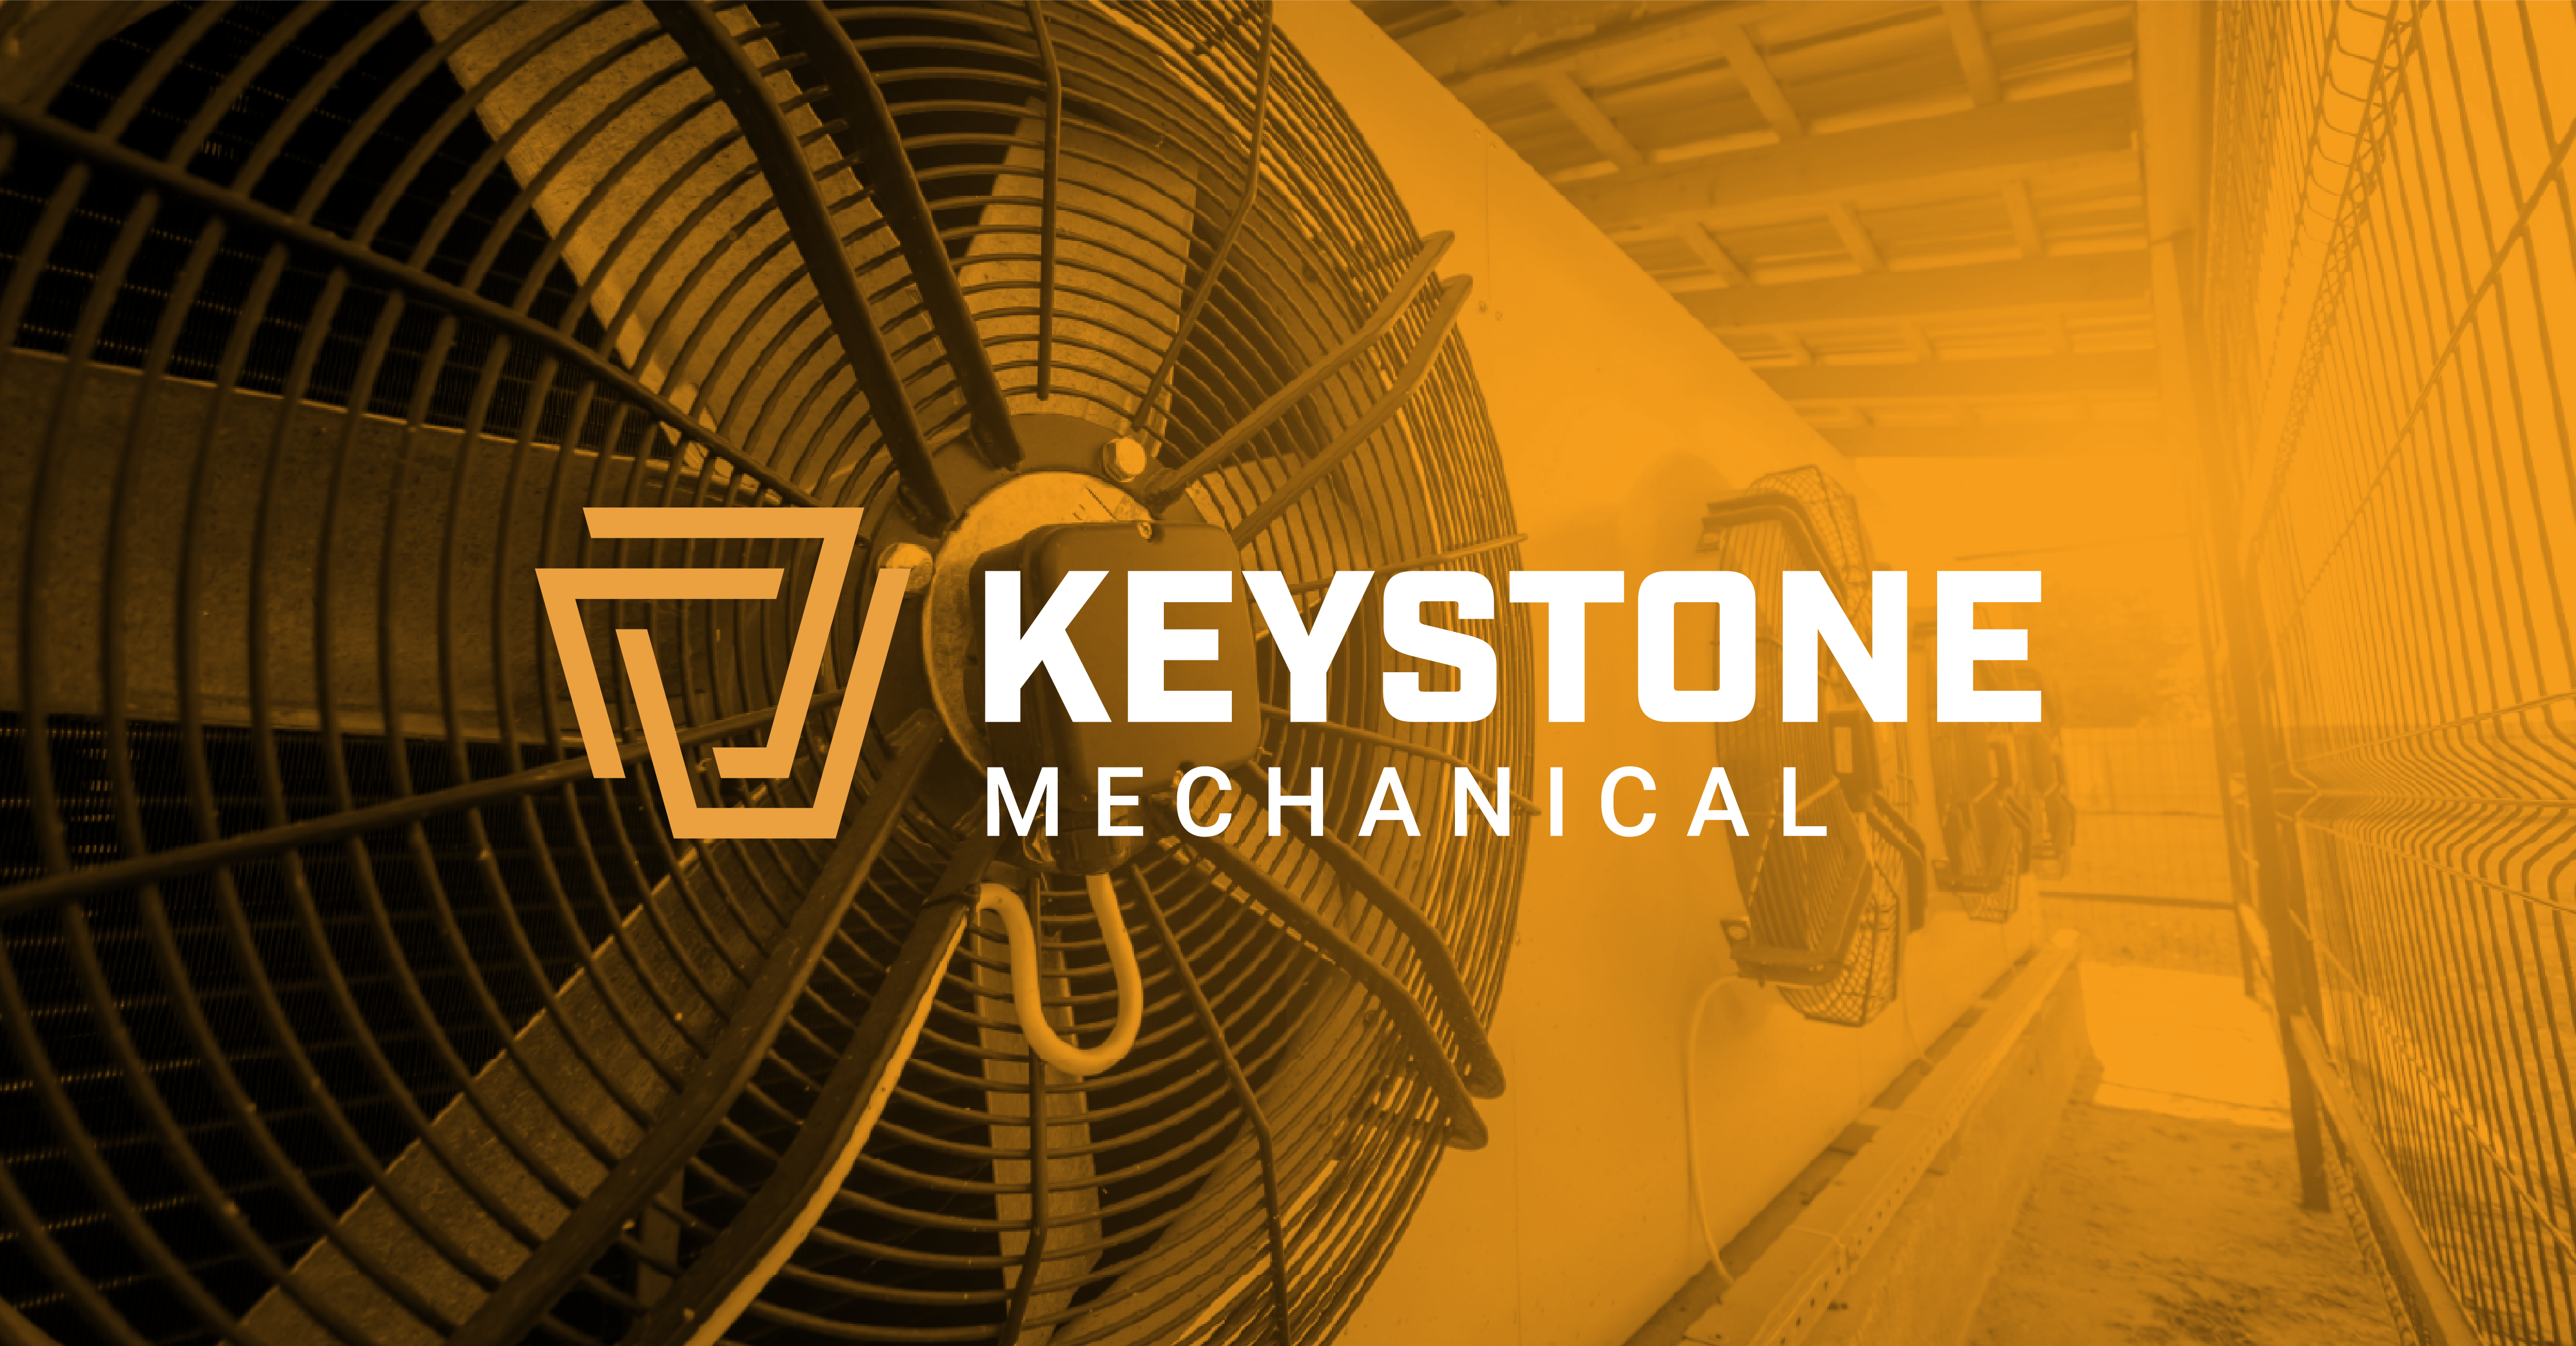 Industrial air conditioning units with the Keystone Mechanical logo overlay for our Design Portfolio.